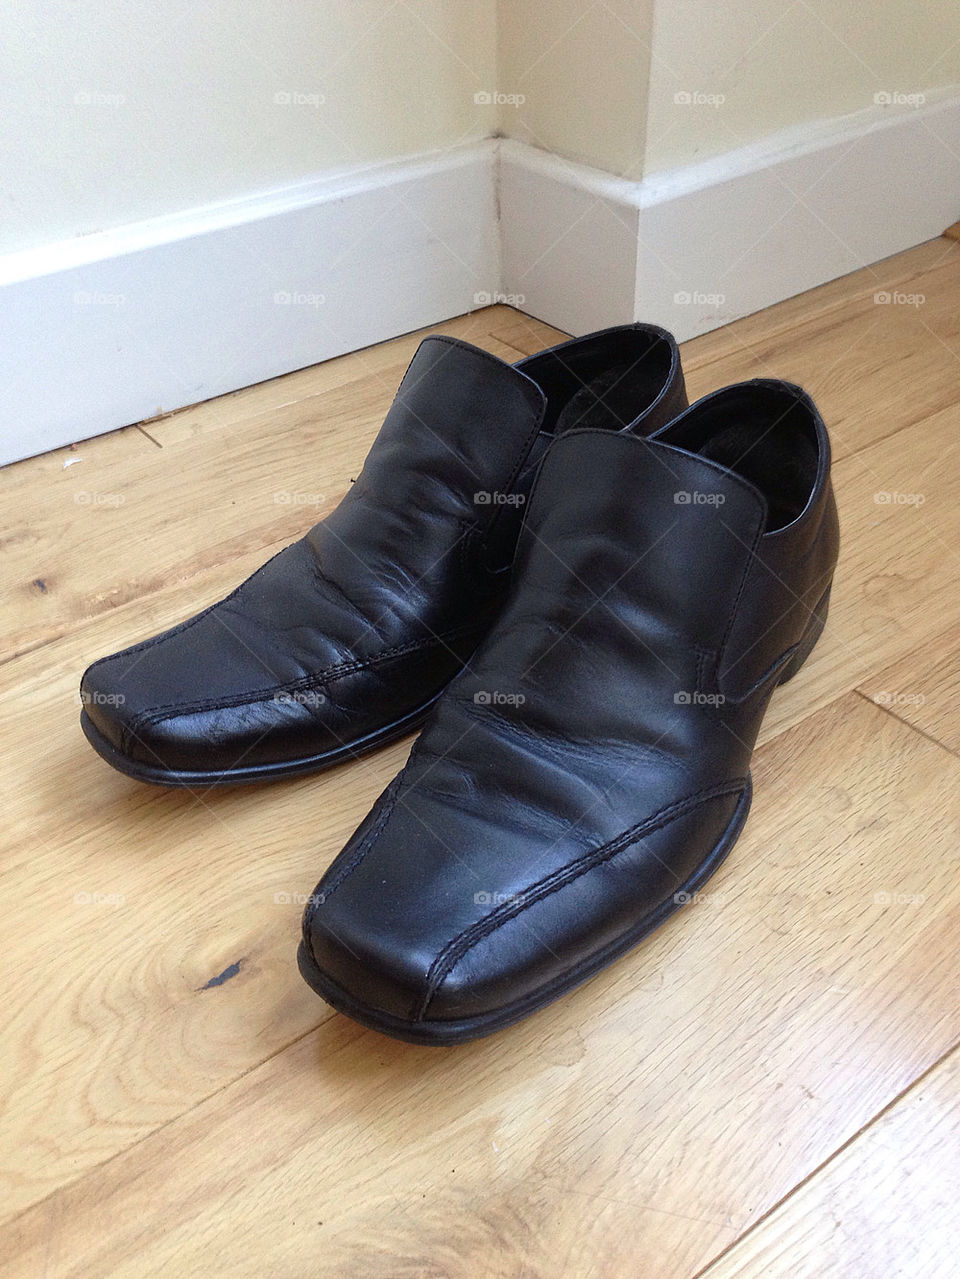 Mens black shoes on a wooden floor